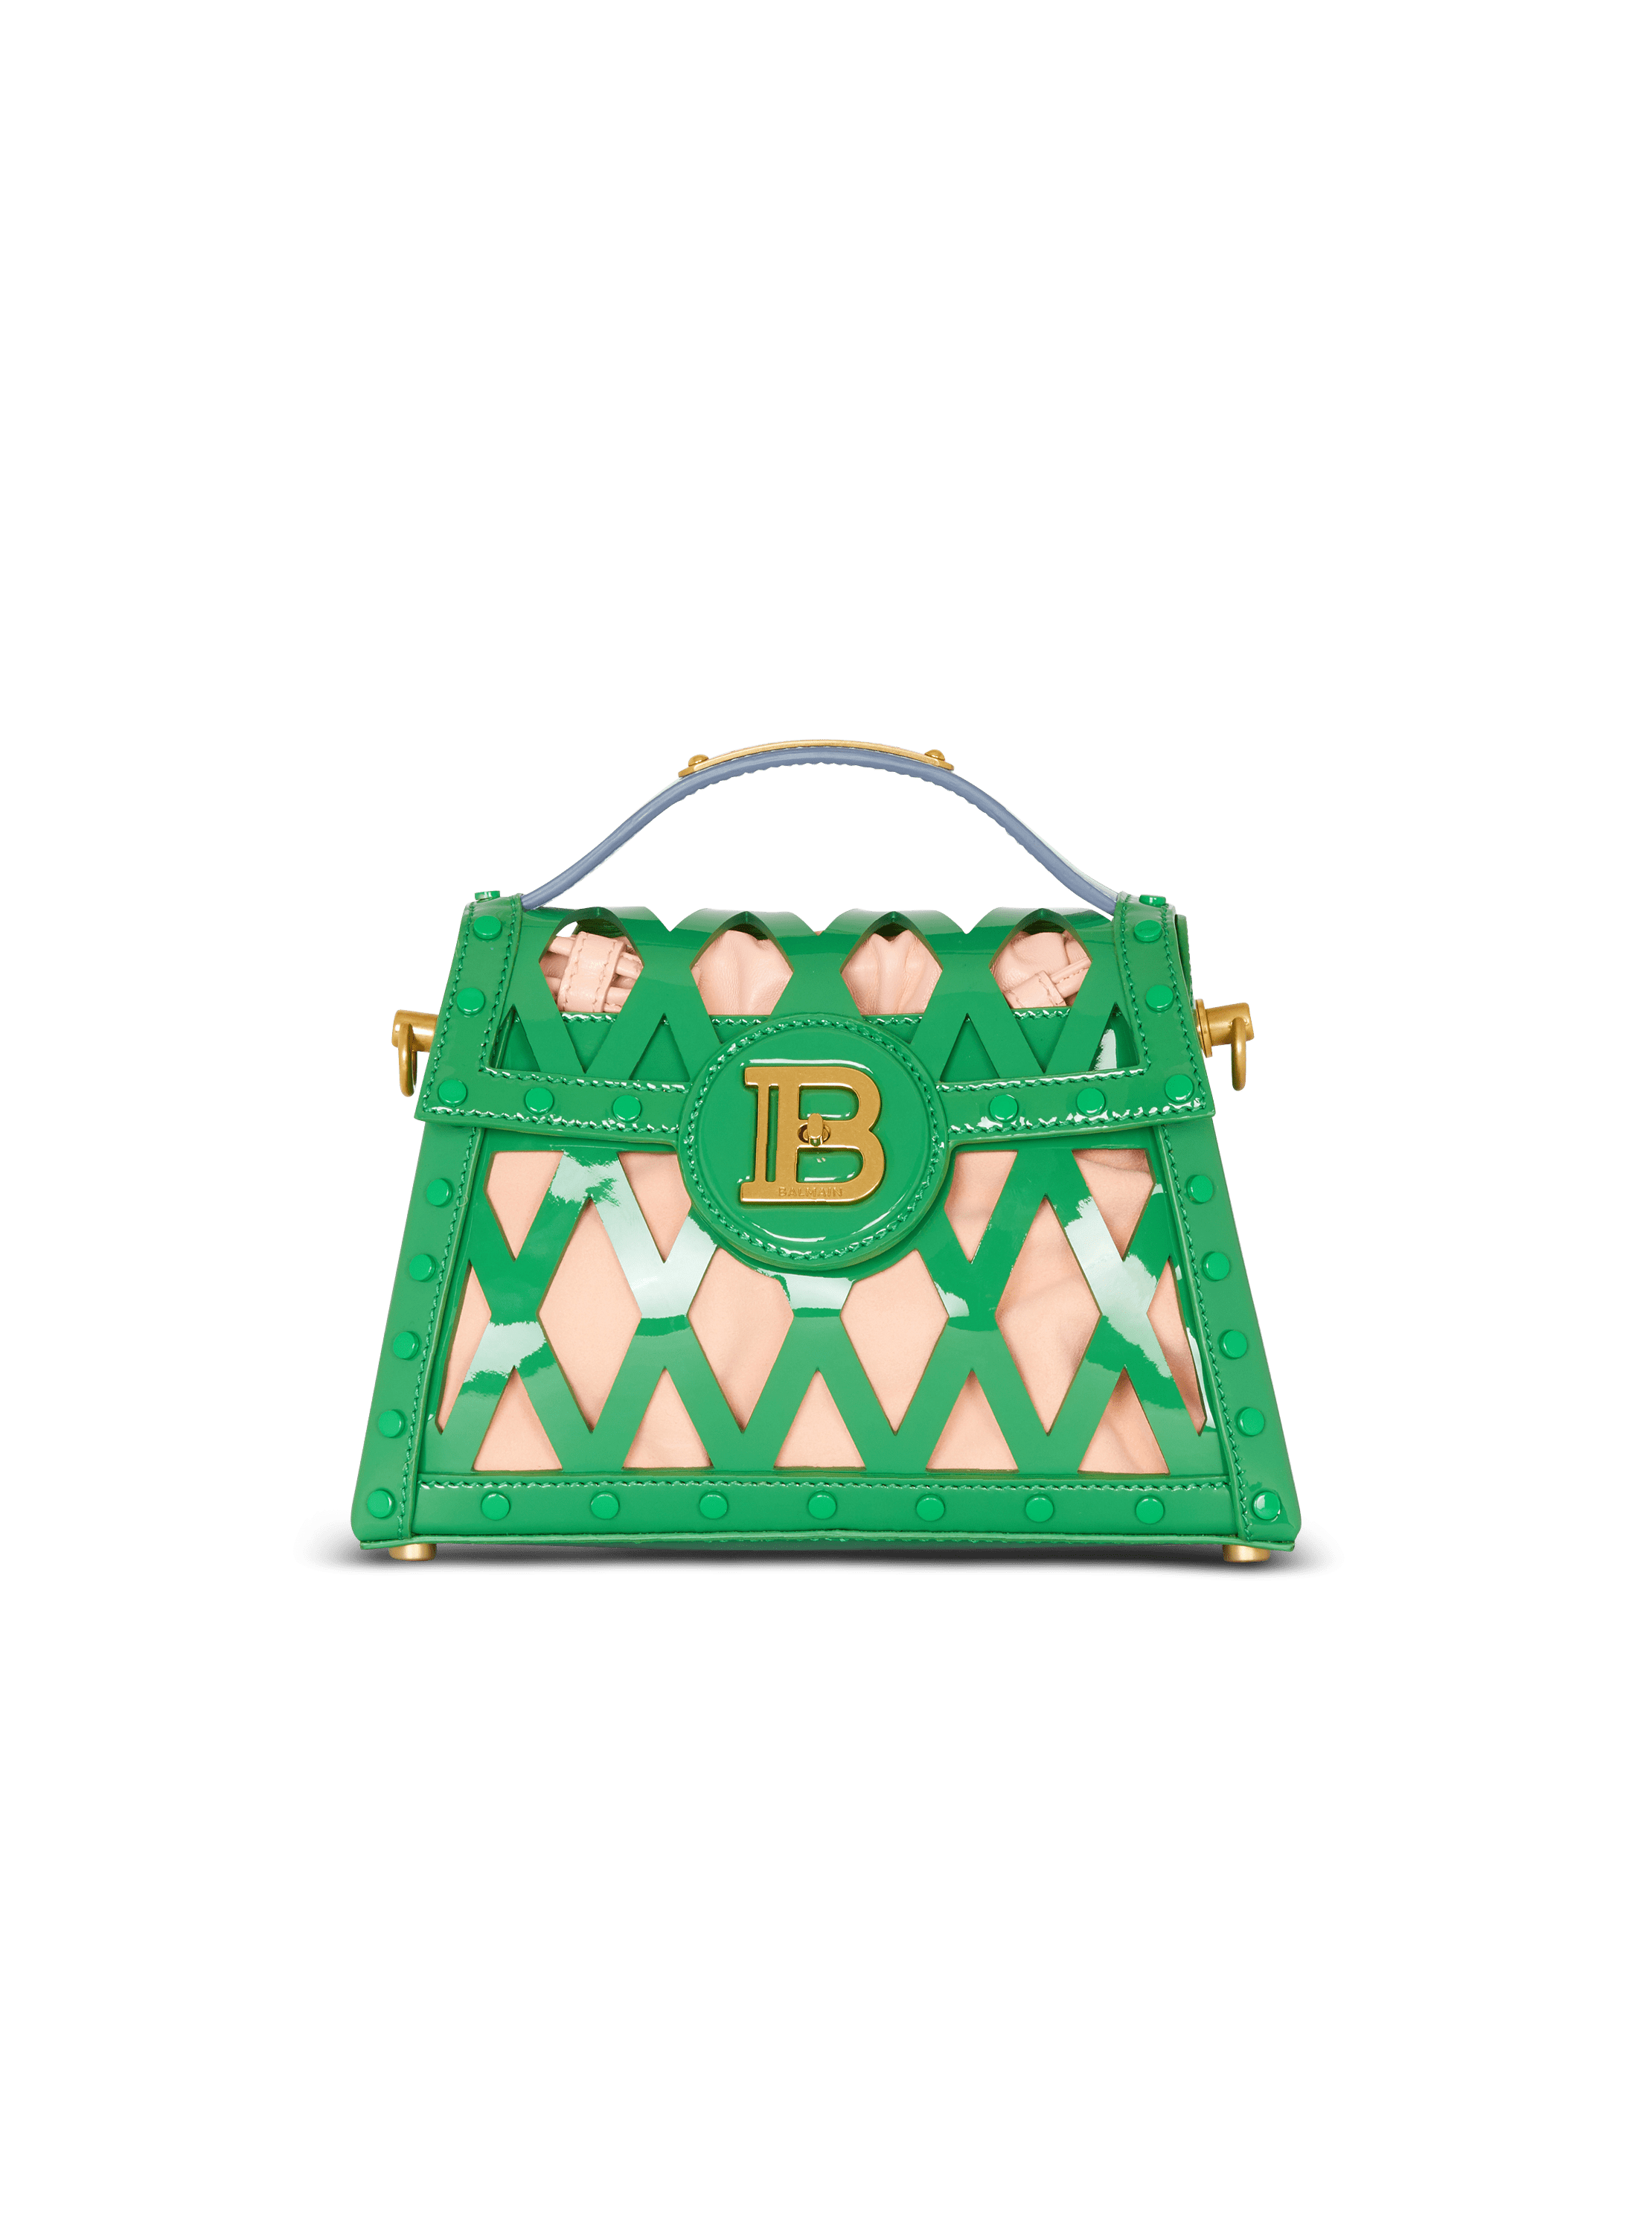 B-Buzz Dynasty bag in patent leather with an openwork grid motif